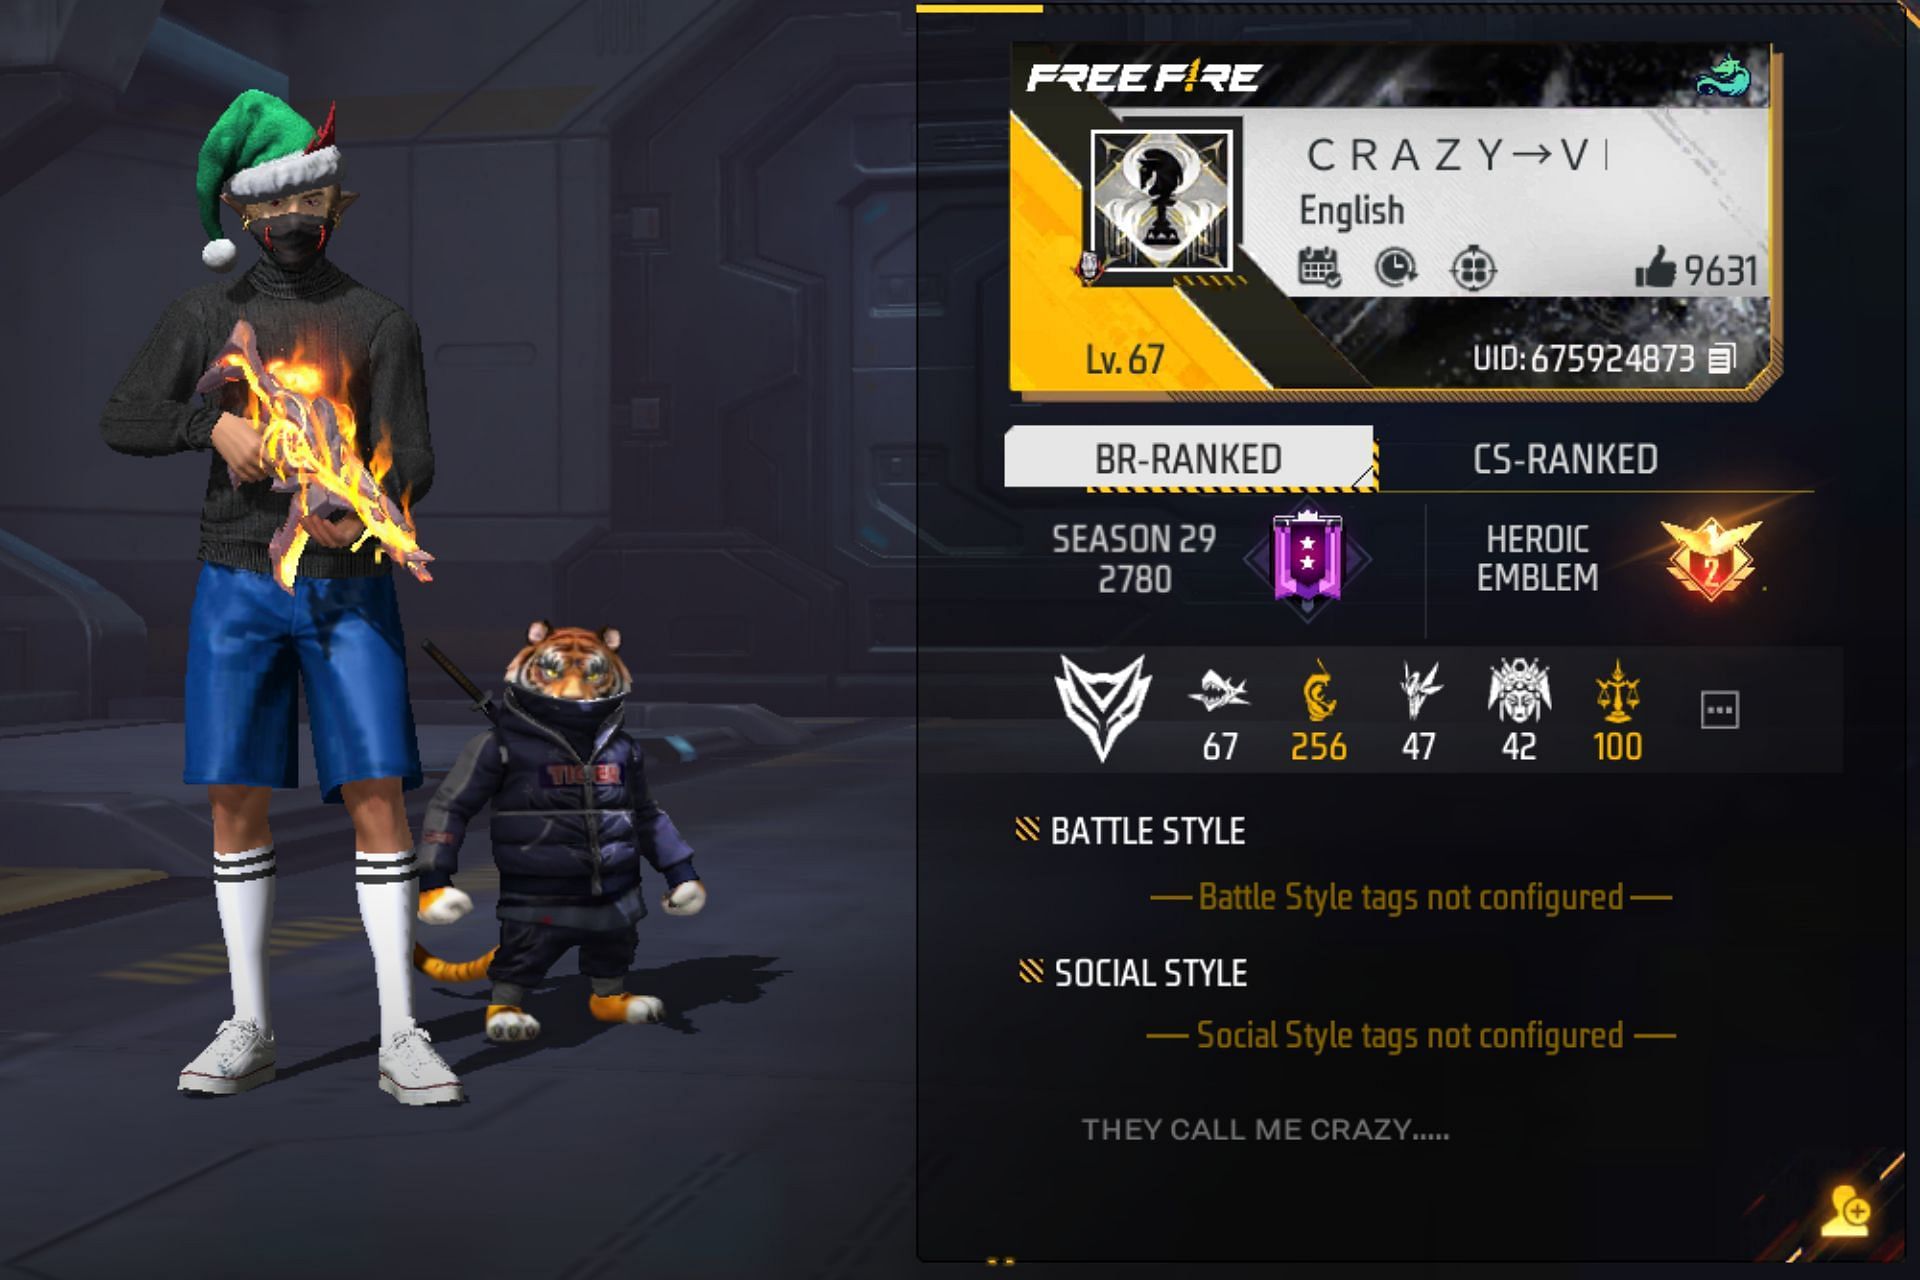 Crazy Gamer Vki's Free Fire MAX ID, level, stats, rank, guild, earnings,  and more